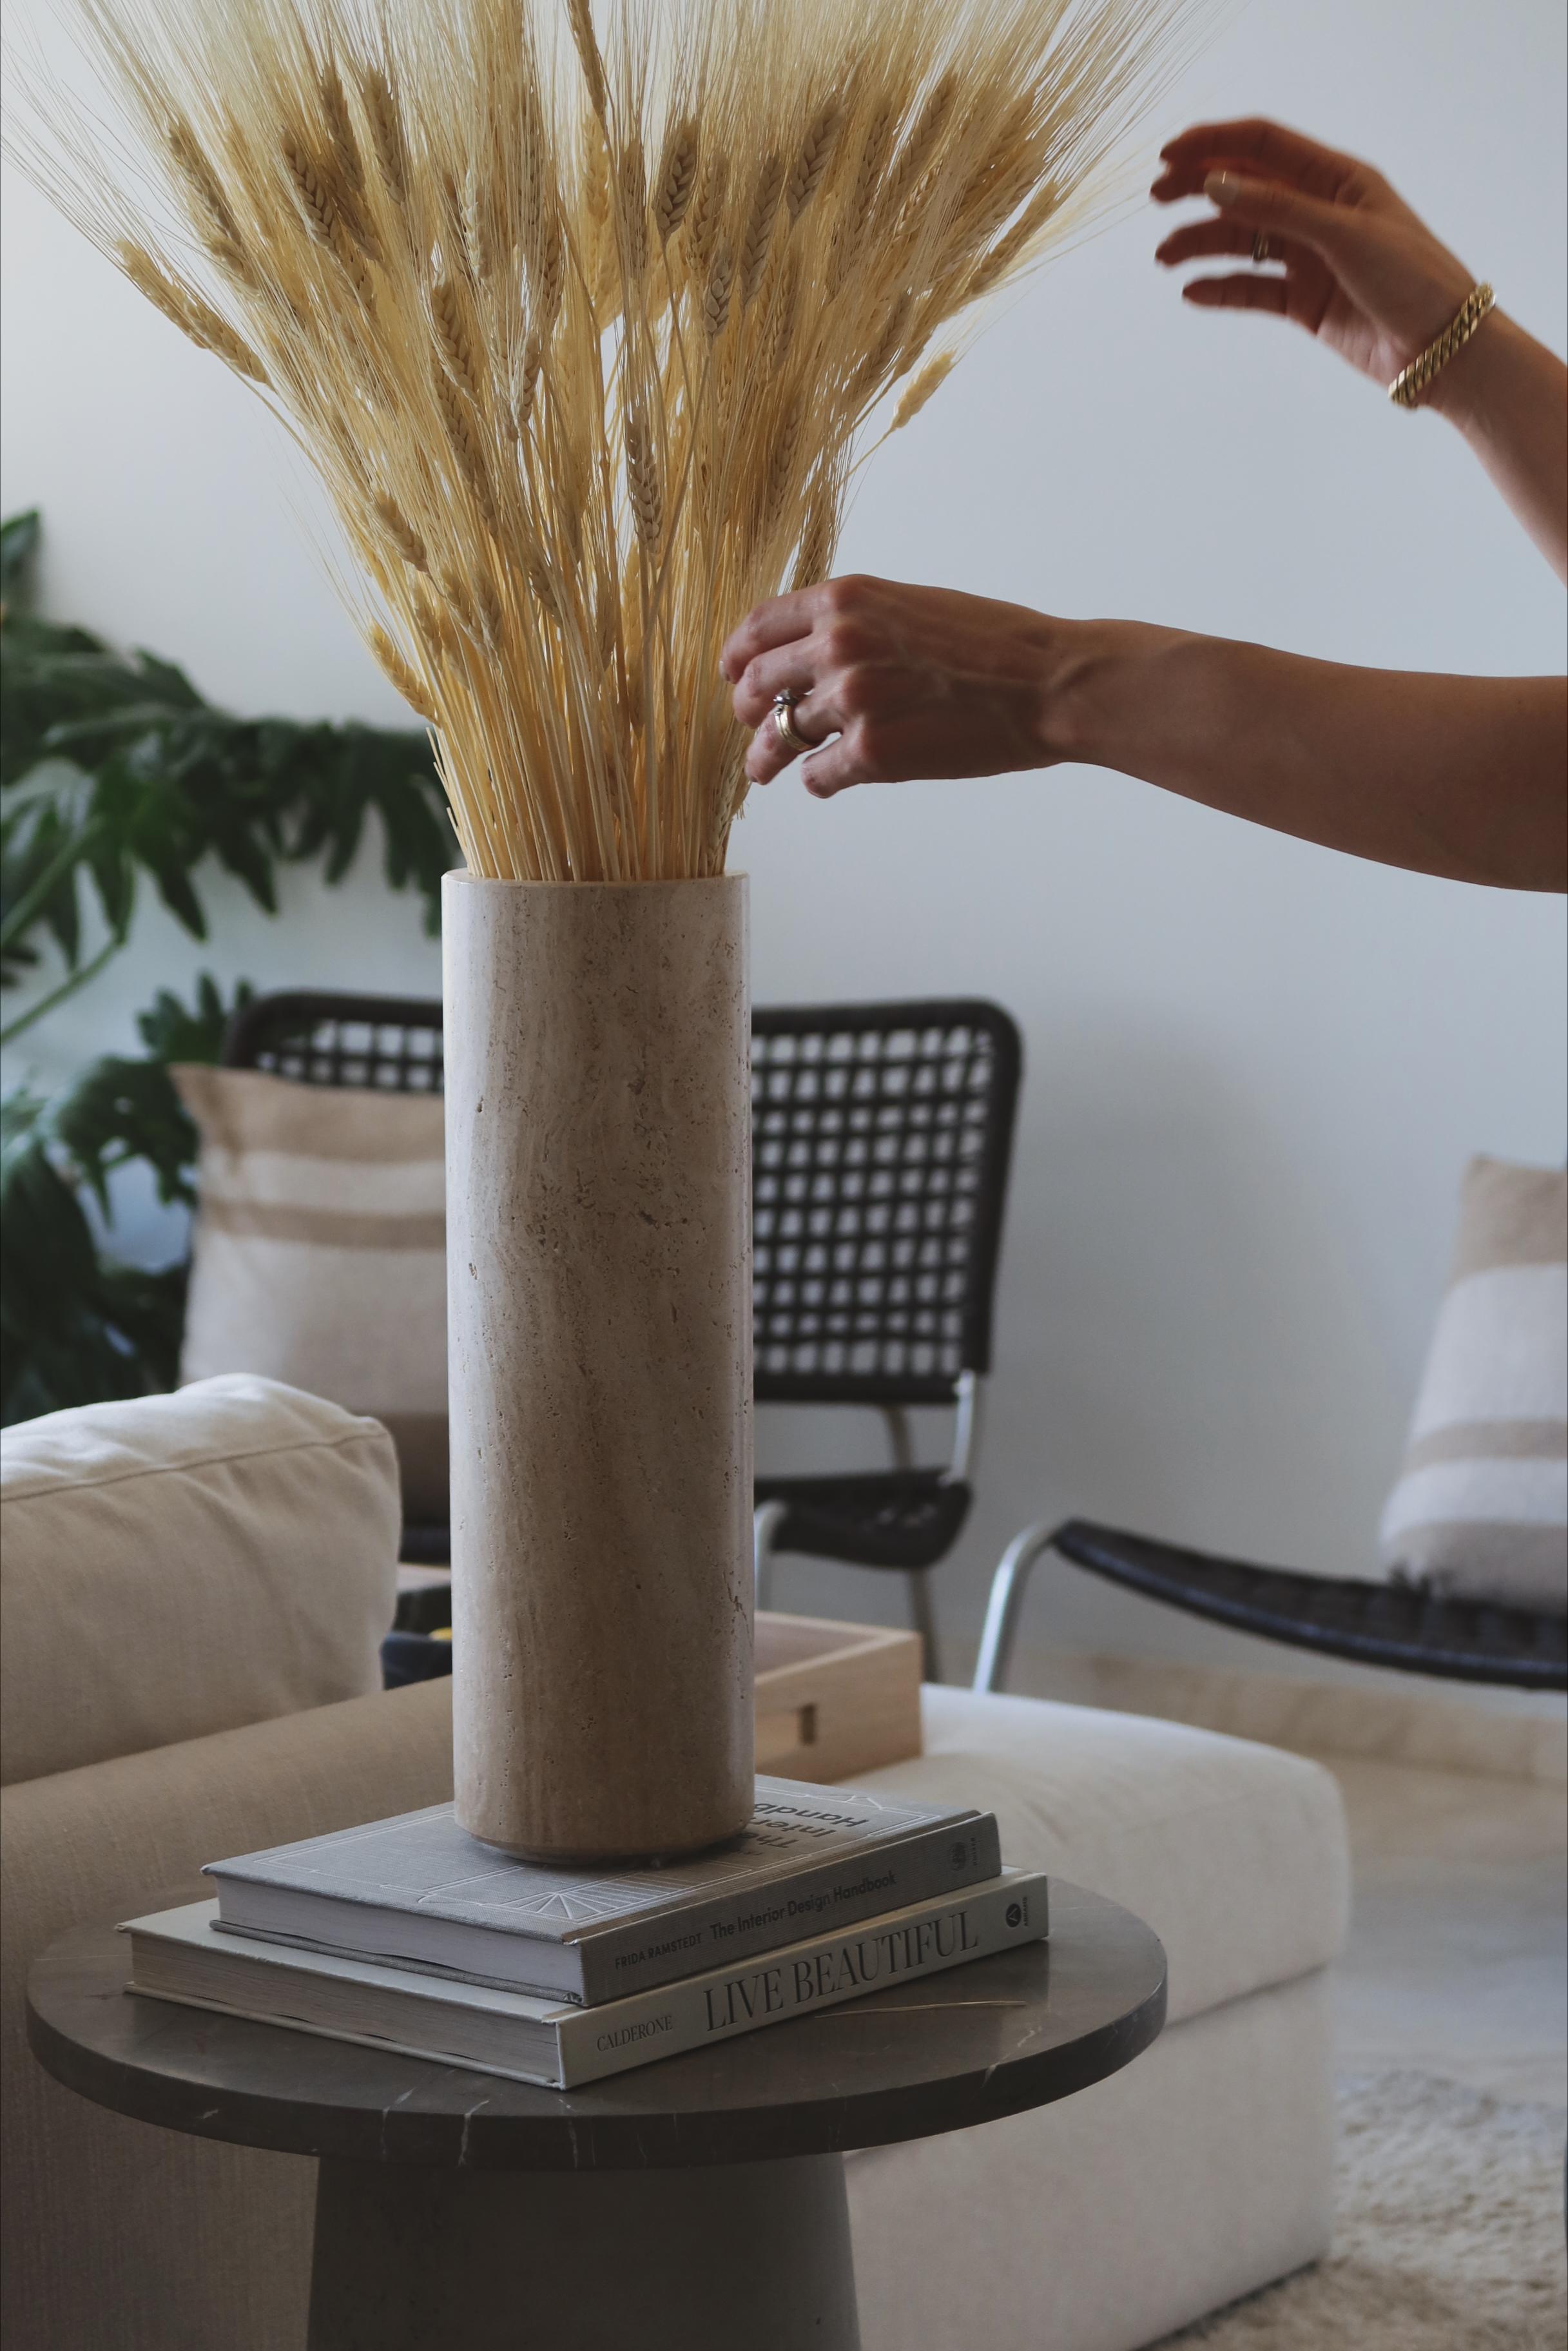 Introducing an exquisite sculptural marble vase, expertly crafted by Mexican marble artisans. Available in five stunning varieties of marble including black Monterrey, white Veneciano, gray Rochelle, gray Santo Tomas, and Travertine, this florero is